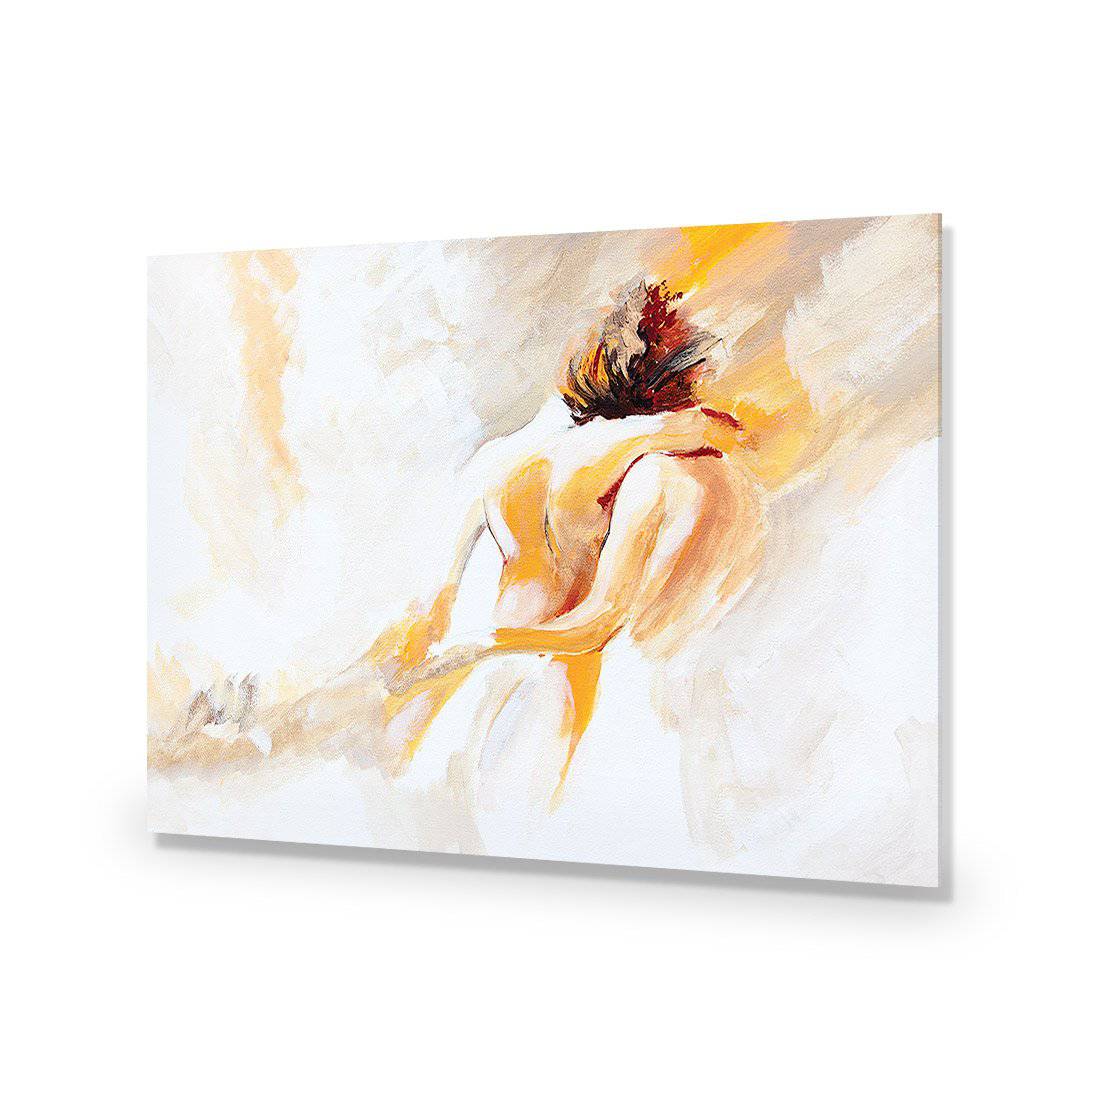 Naked Emotion-Acrylic-Wall Art Design-Without Border-Acrylic - No Frame-45x30cm-Wall Art Designs